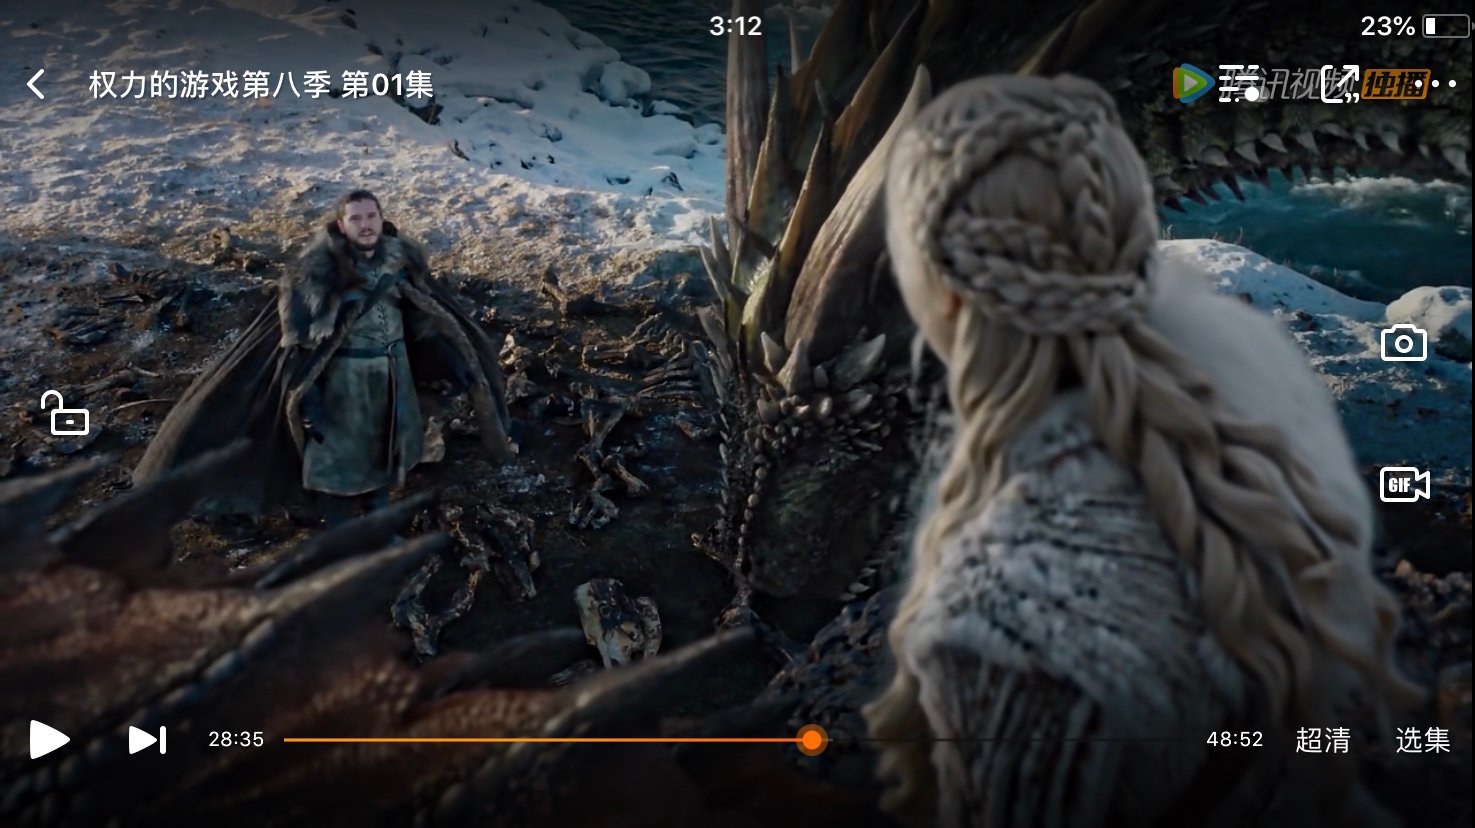 Tencent’s version of the Season 8 premiere is less than 49 minutes, while the original episode is 54 minutes. (Picture: Tencent Video)